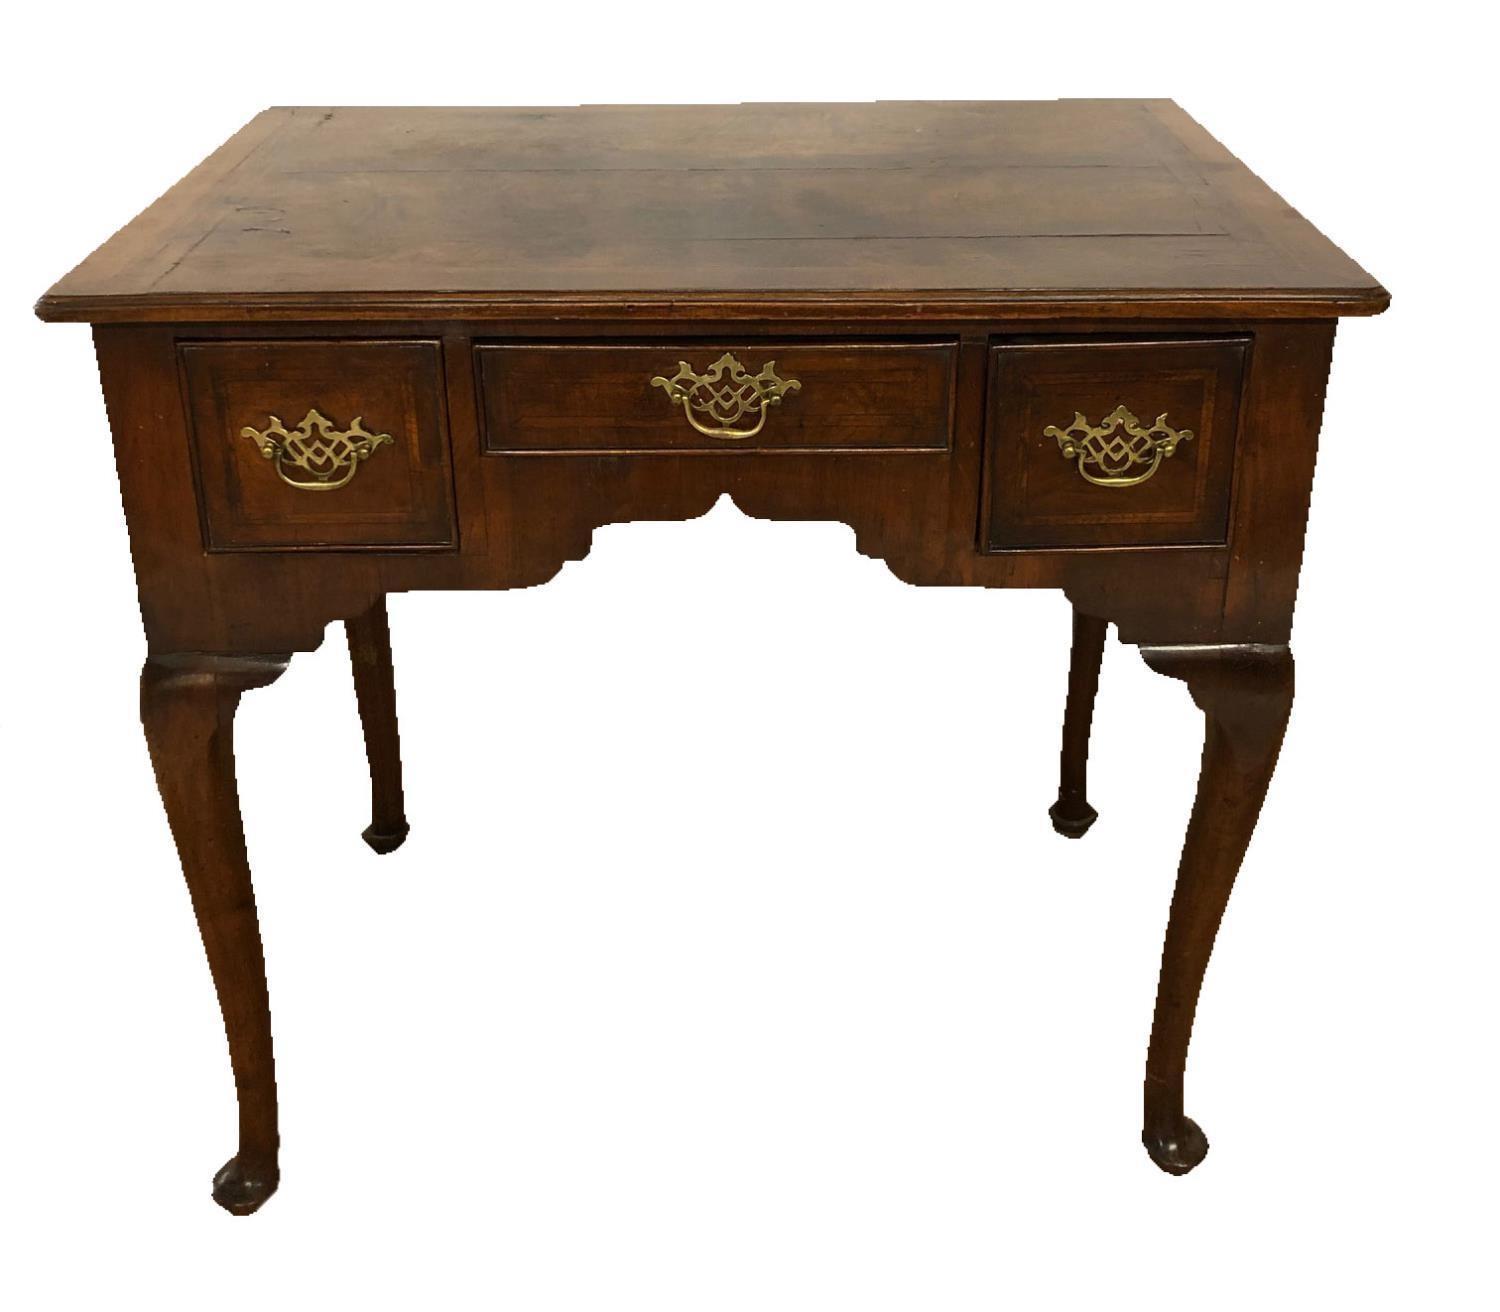 AN 18TH CENTURY WALNUT LOW BOYthe three drawers fitted with pierced brass handles on cabriole legs